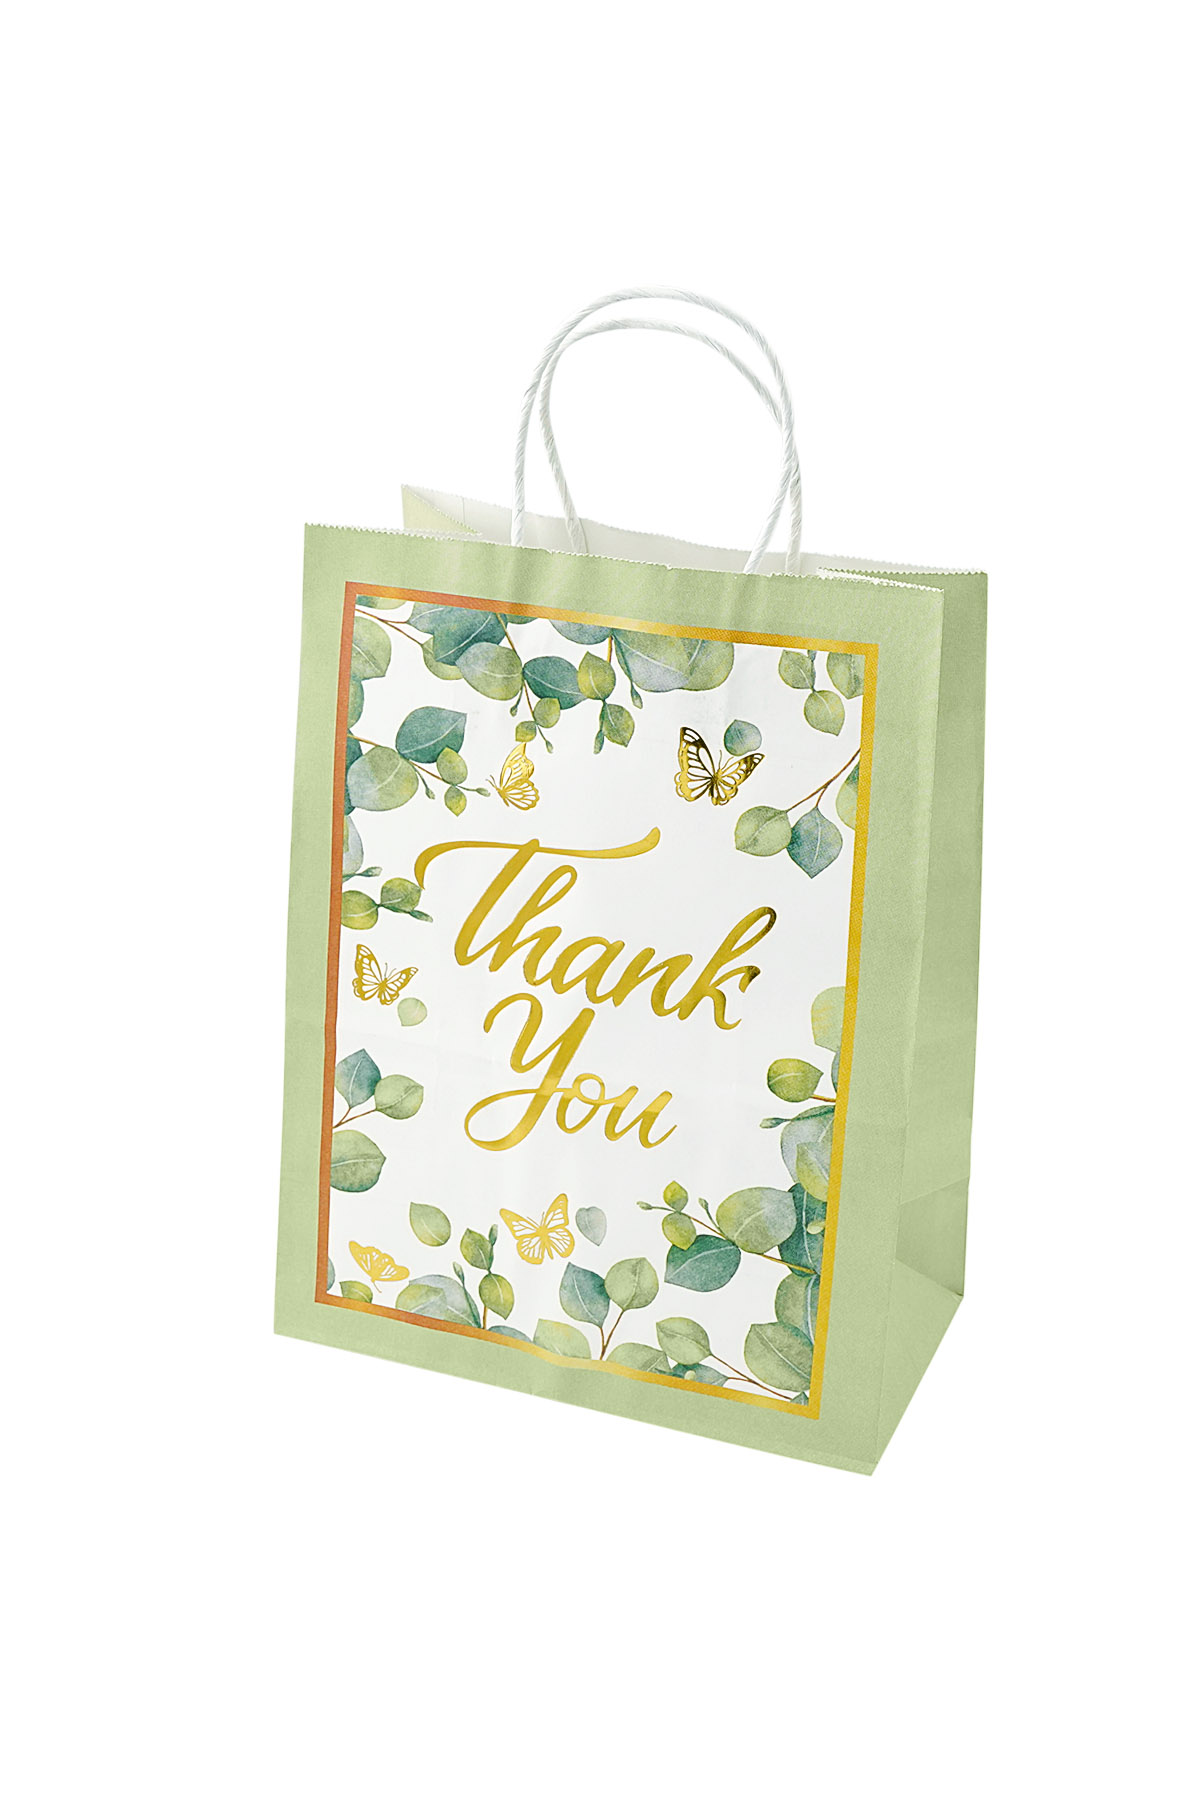 Large gift bag thank you leaves - green h5 